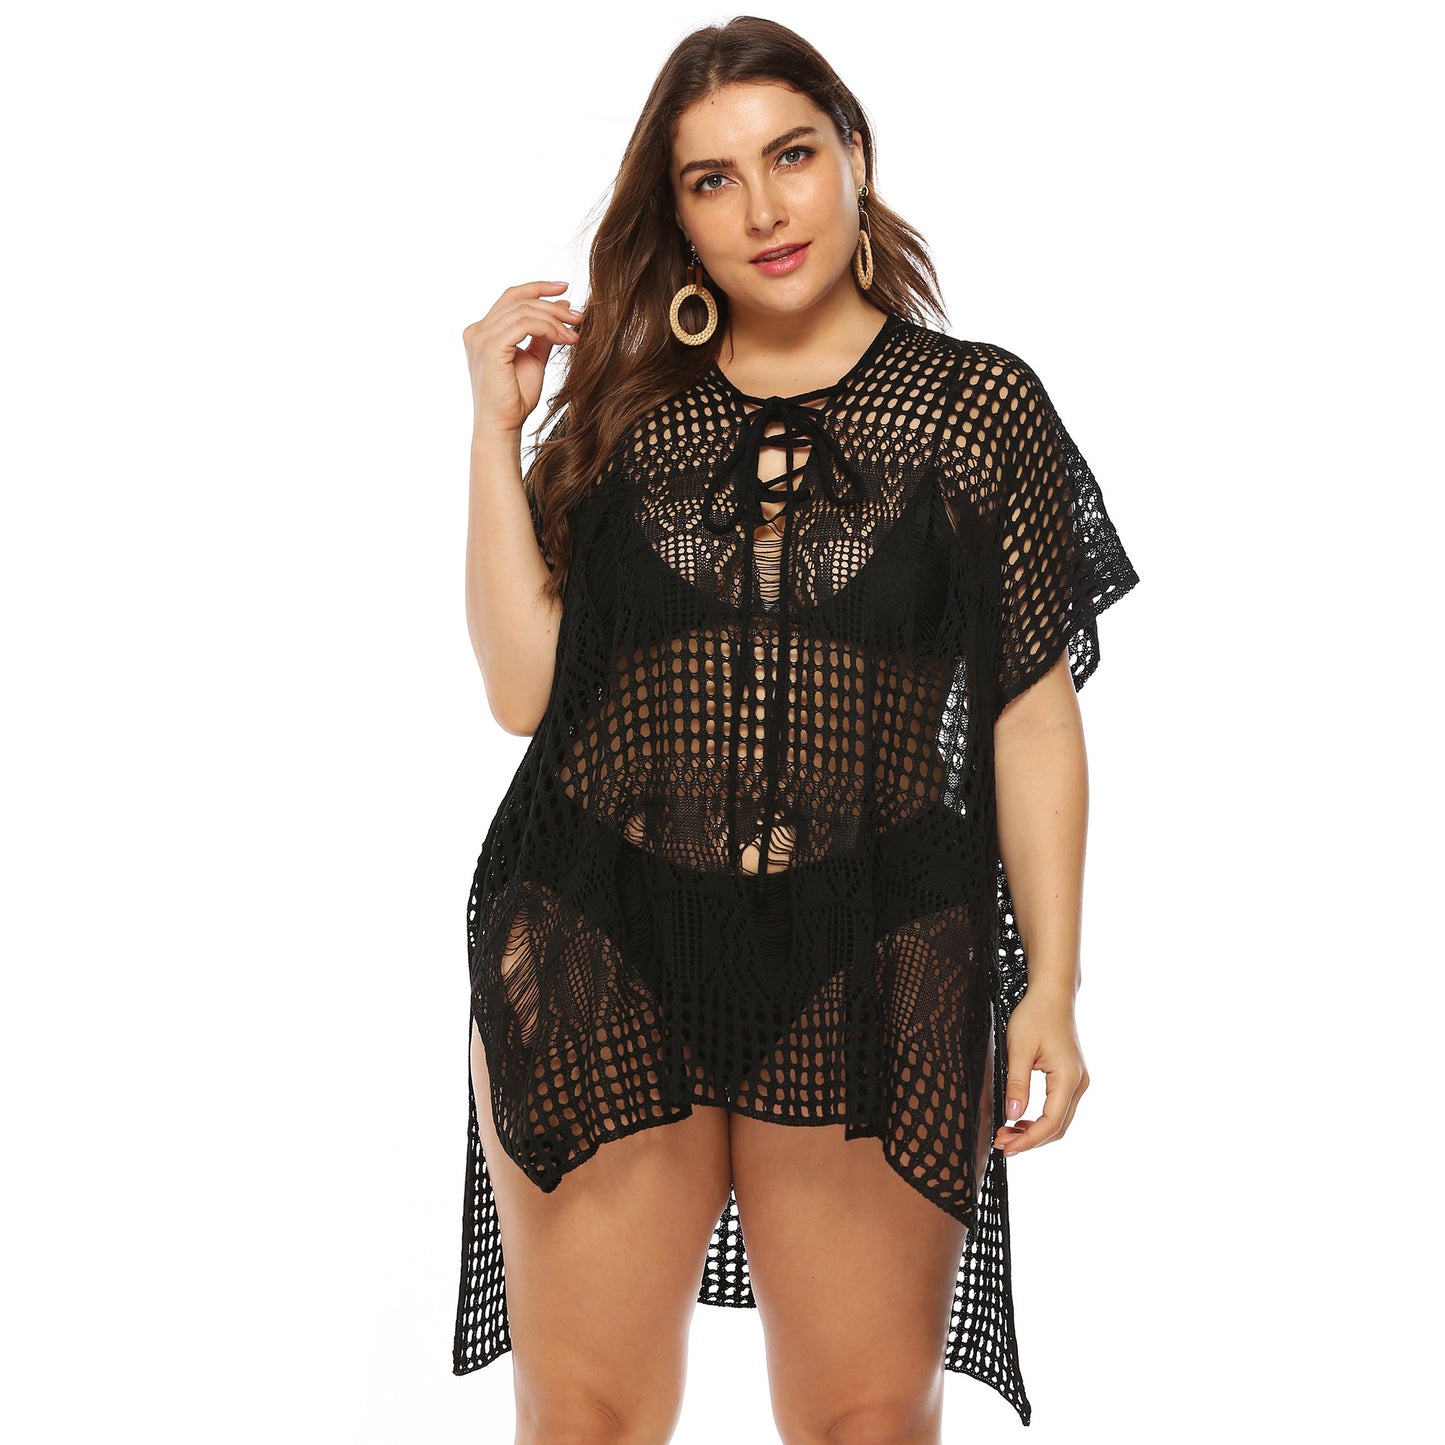 Plus Size Women Clothing Loose Irregular Asymmetric Hollow Out Cutout out See-through Beach Cover Up